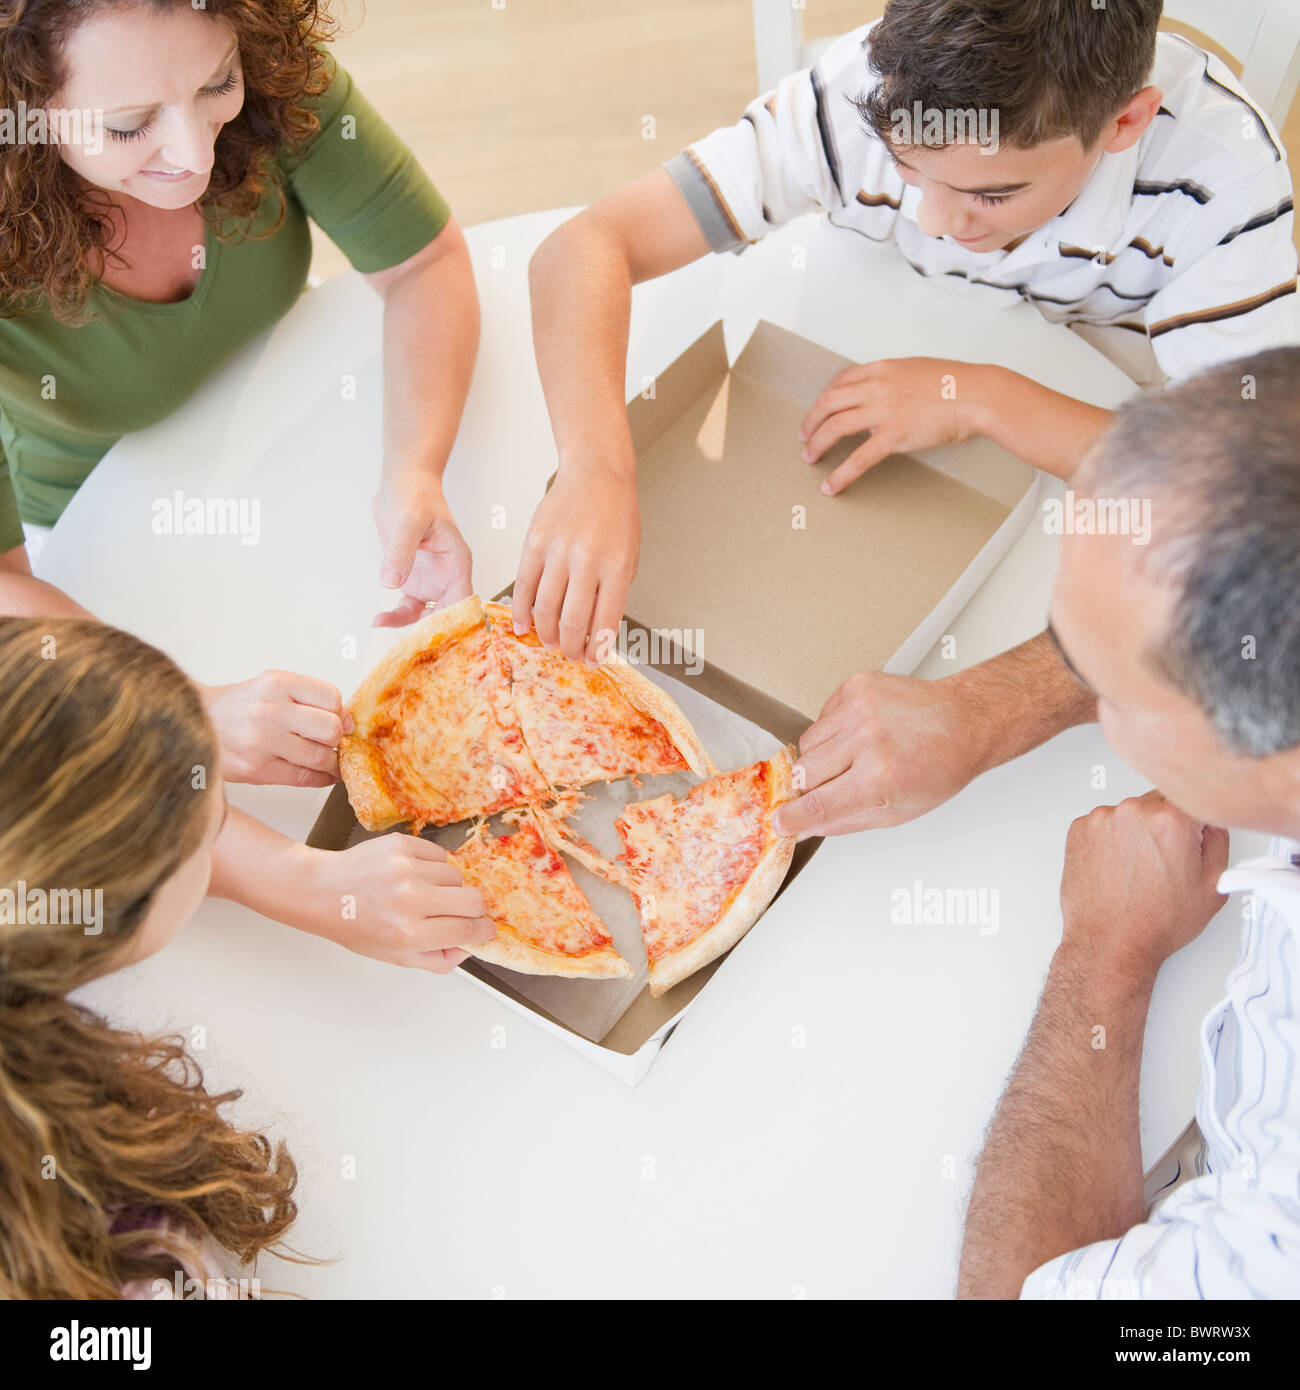 Hispanic family eating pizza together Banque D'Images